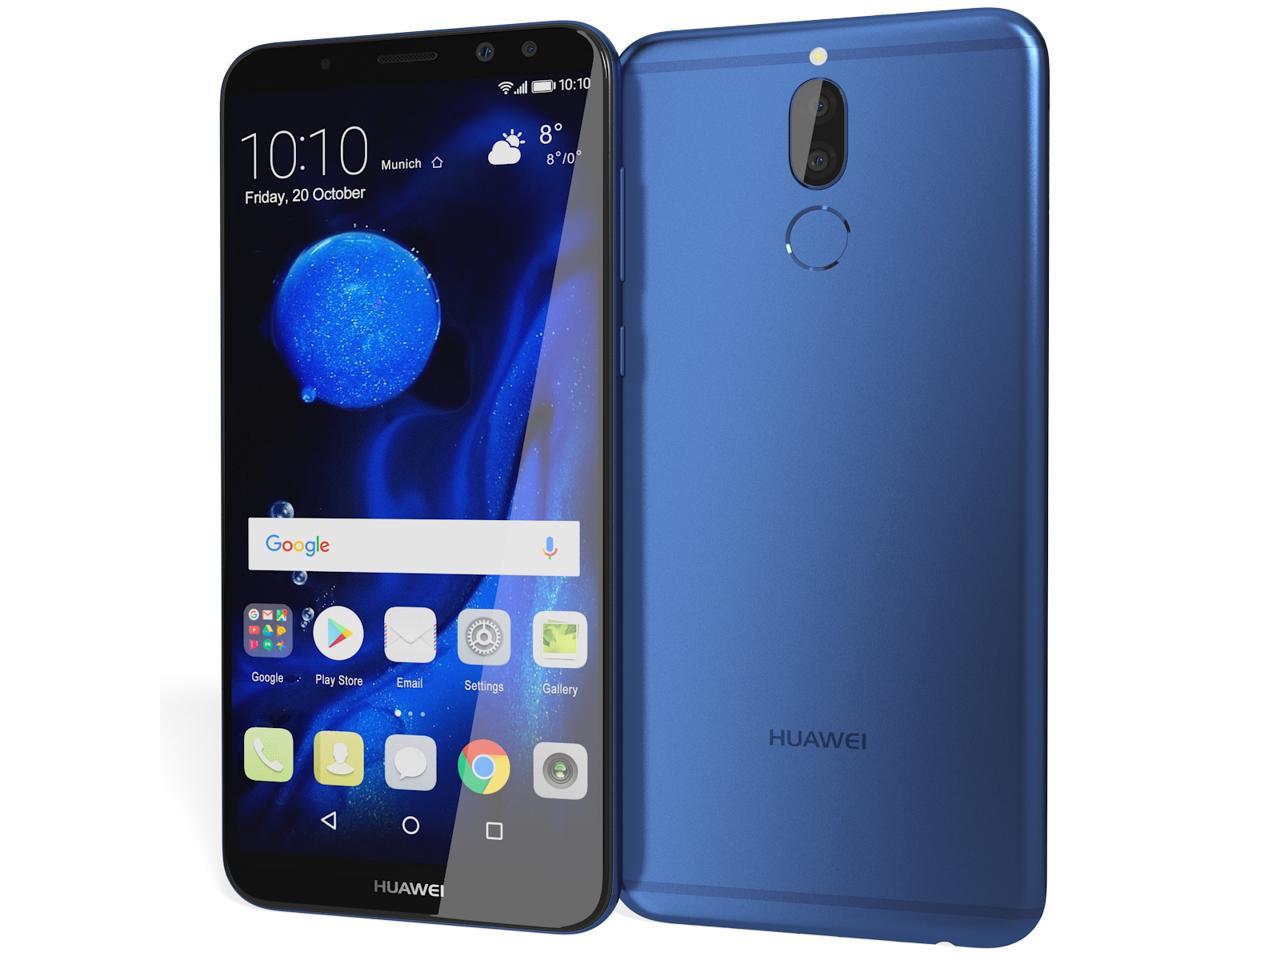 Huawei Mate 10 Lite RNE-L03 64GB GSM Unlocked Android SmartPhone - Aurora Blue